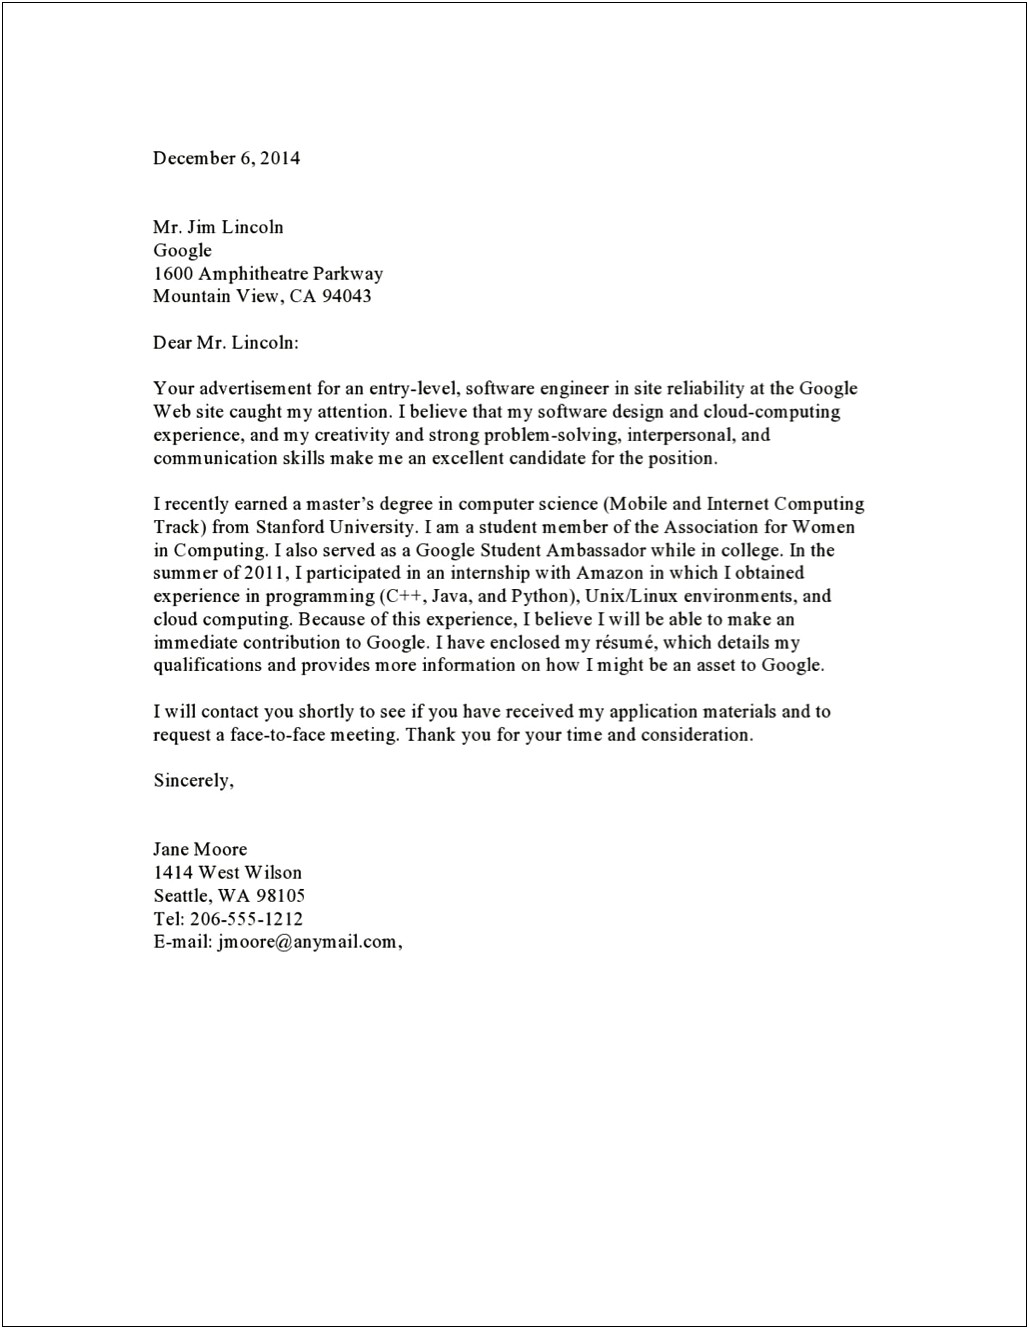 Sample Email Cover Letters For Resumes For Internships